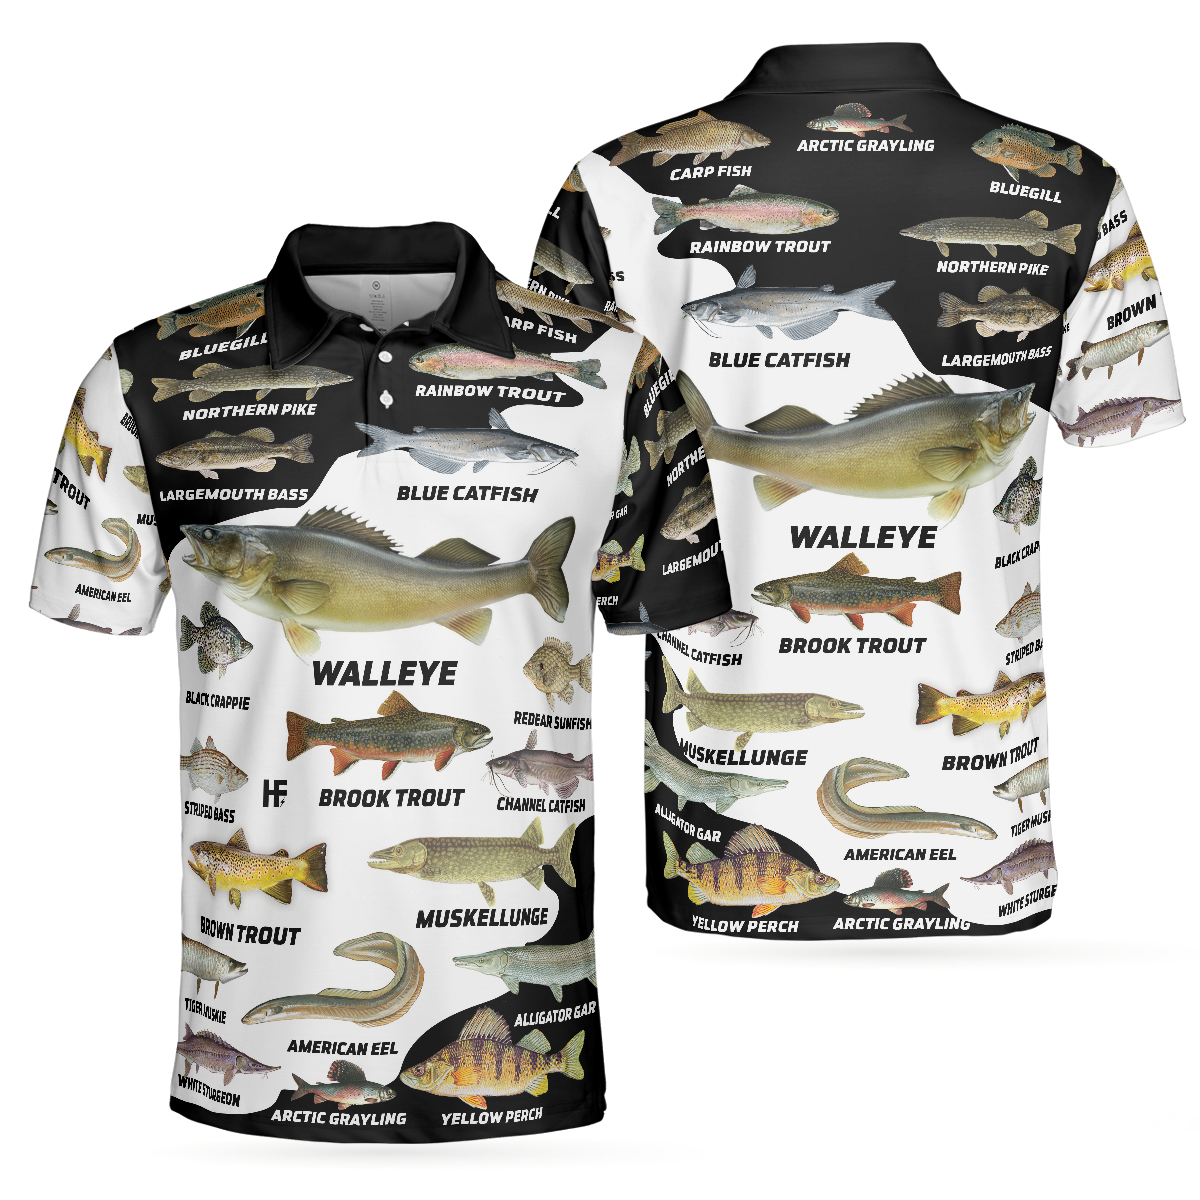 Freshwater Fish Types All Over Print Polo Shirt, Polo Golf Shirt For Men, Best Golf Shirt